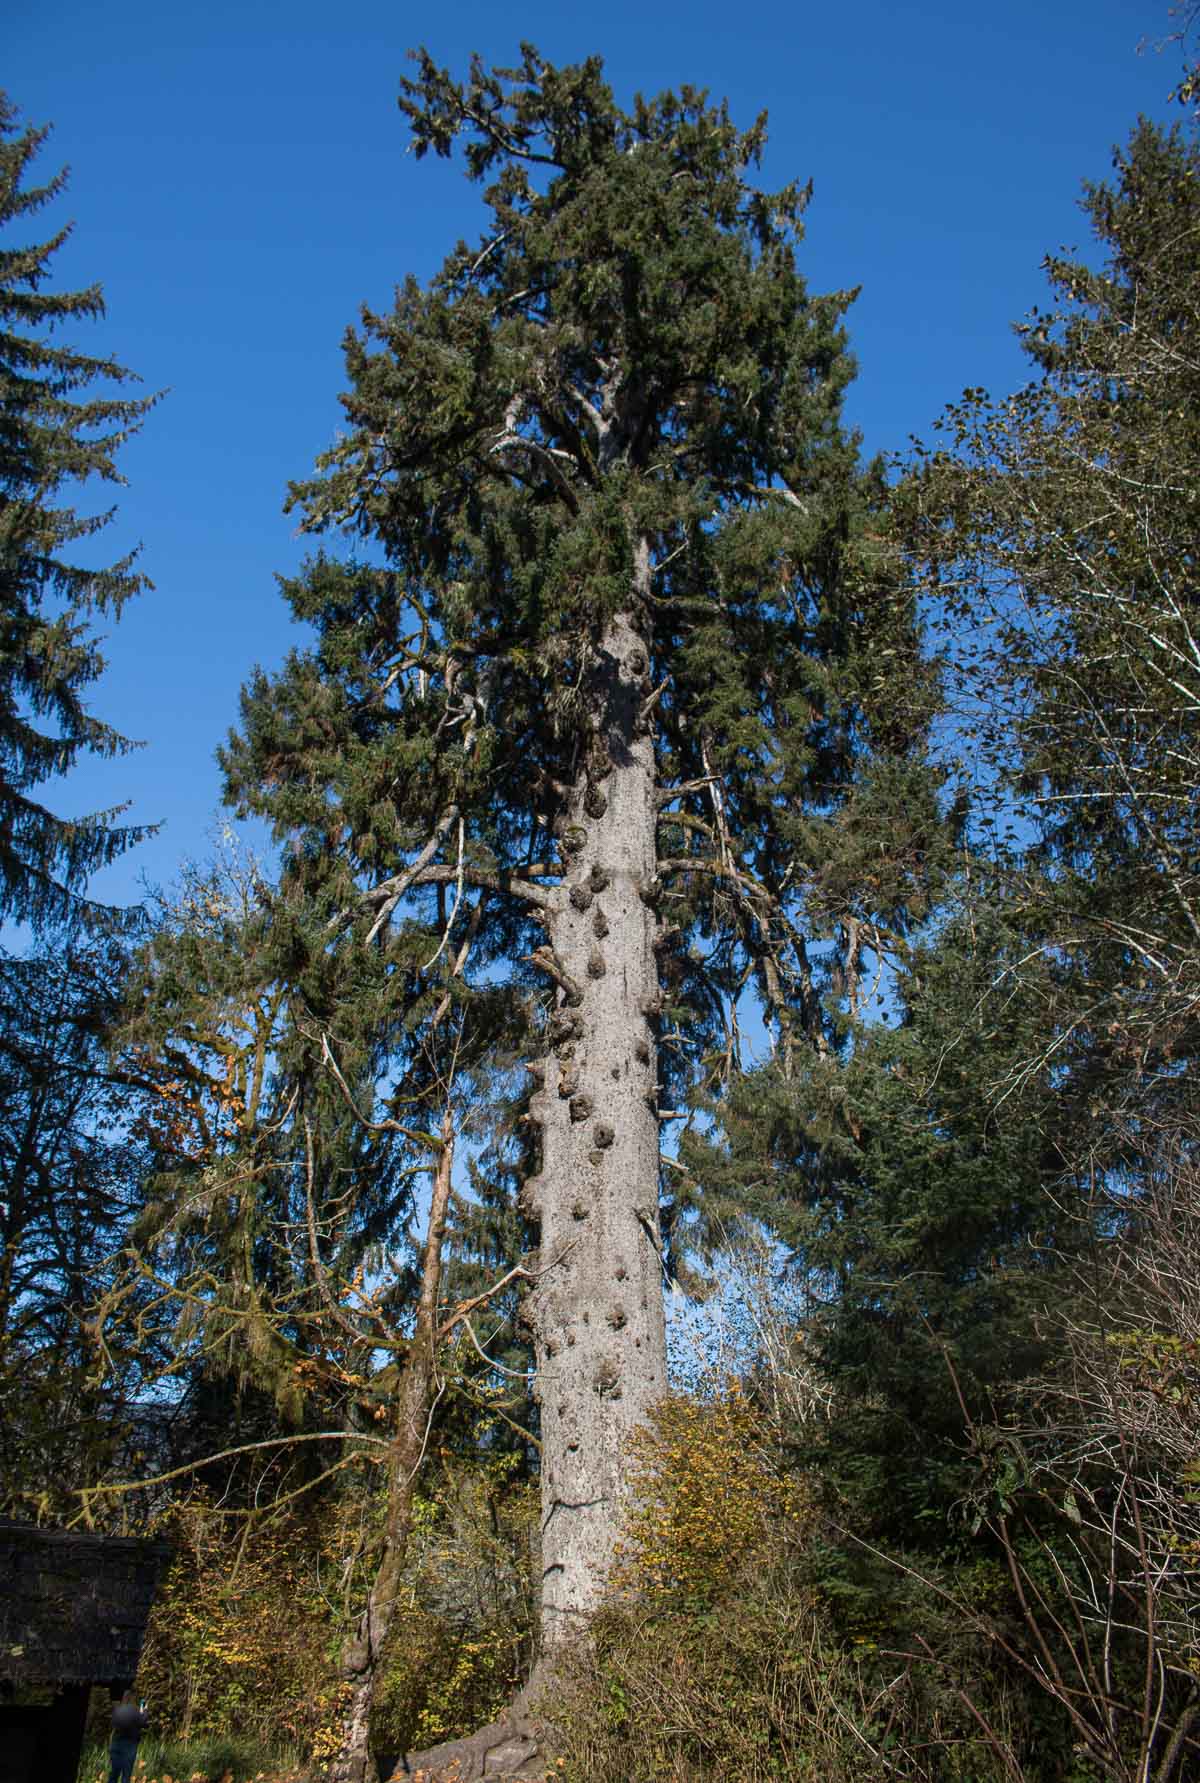 Largest Sitka spruce tree in the world, Quinault Rain Forest, Washington